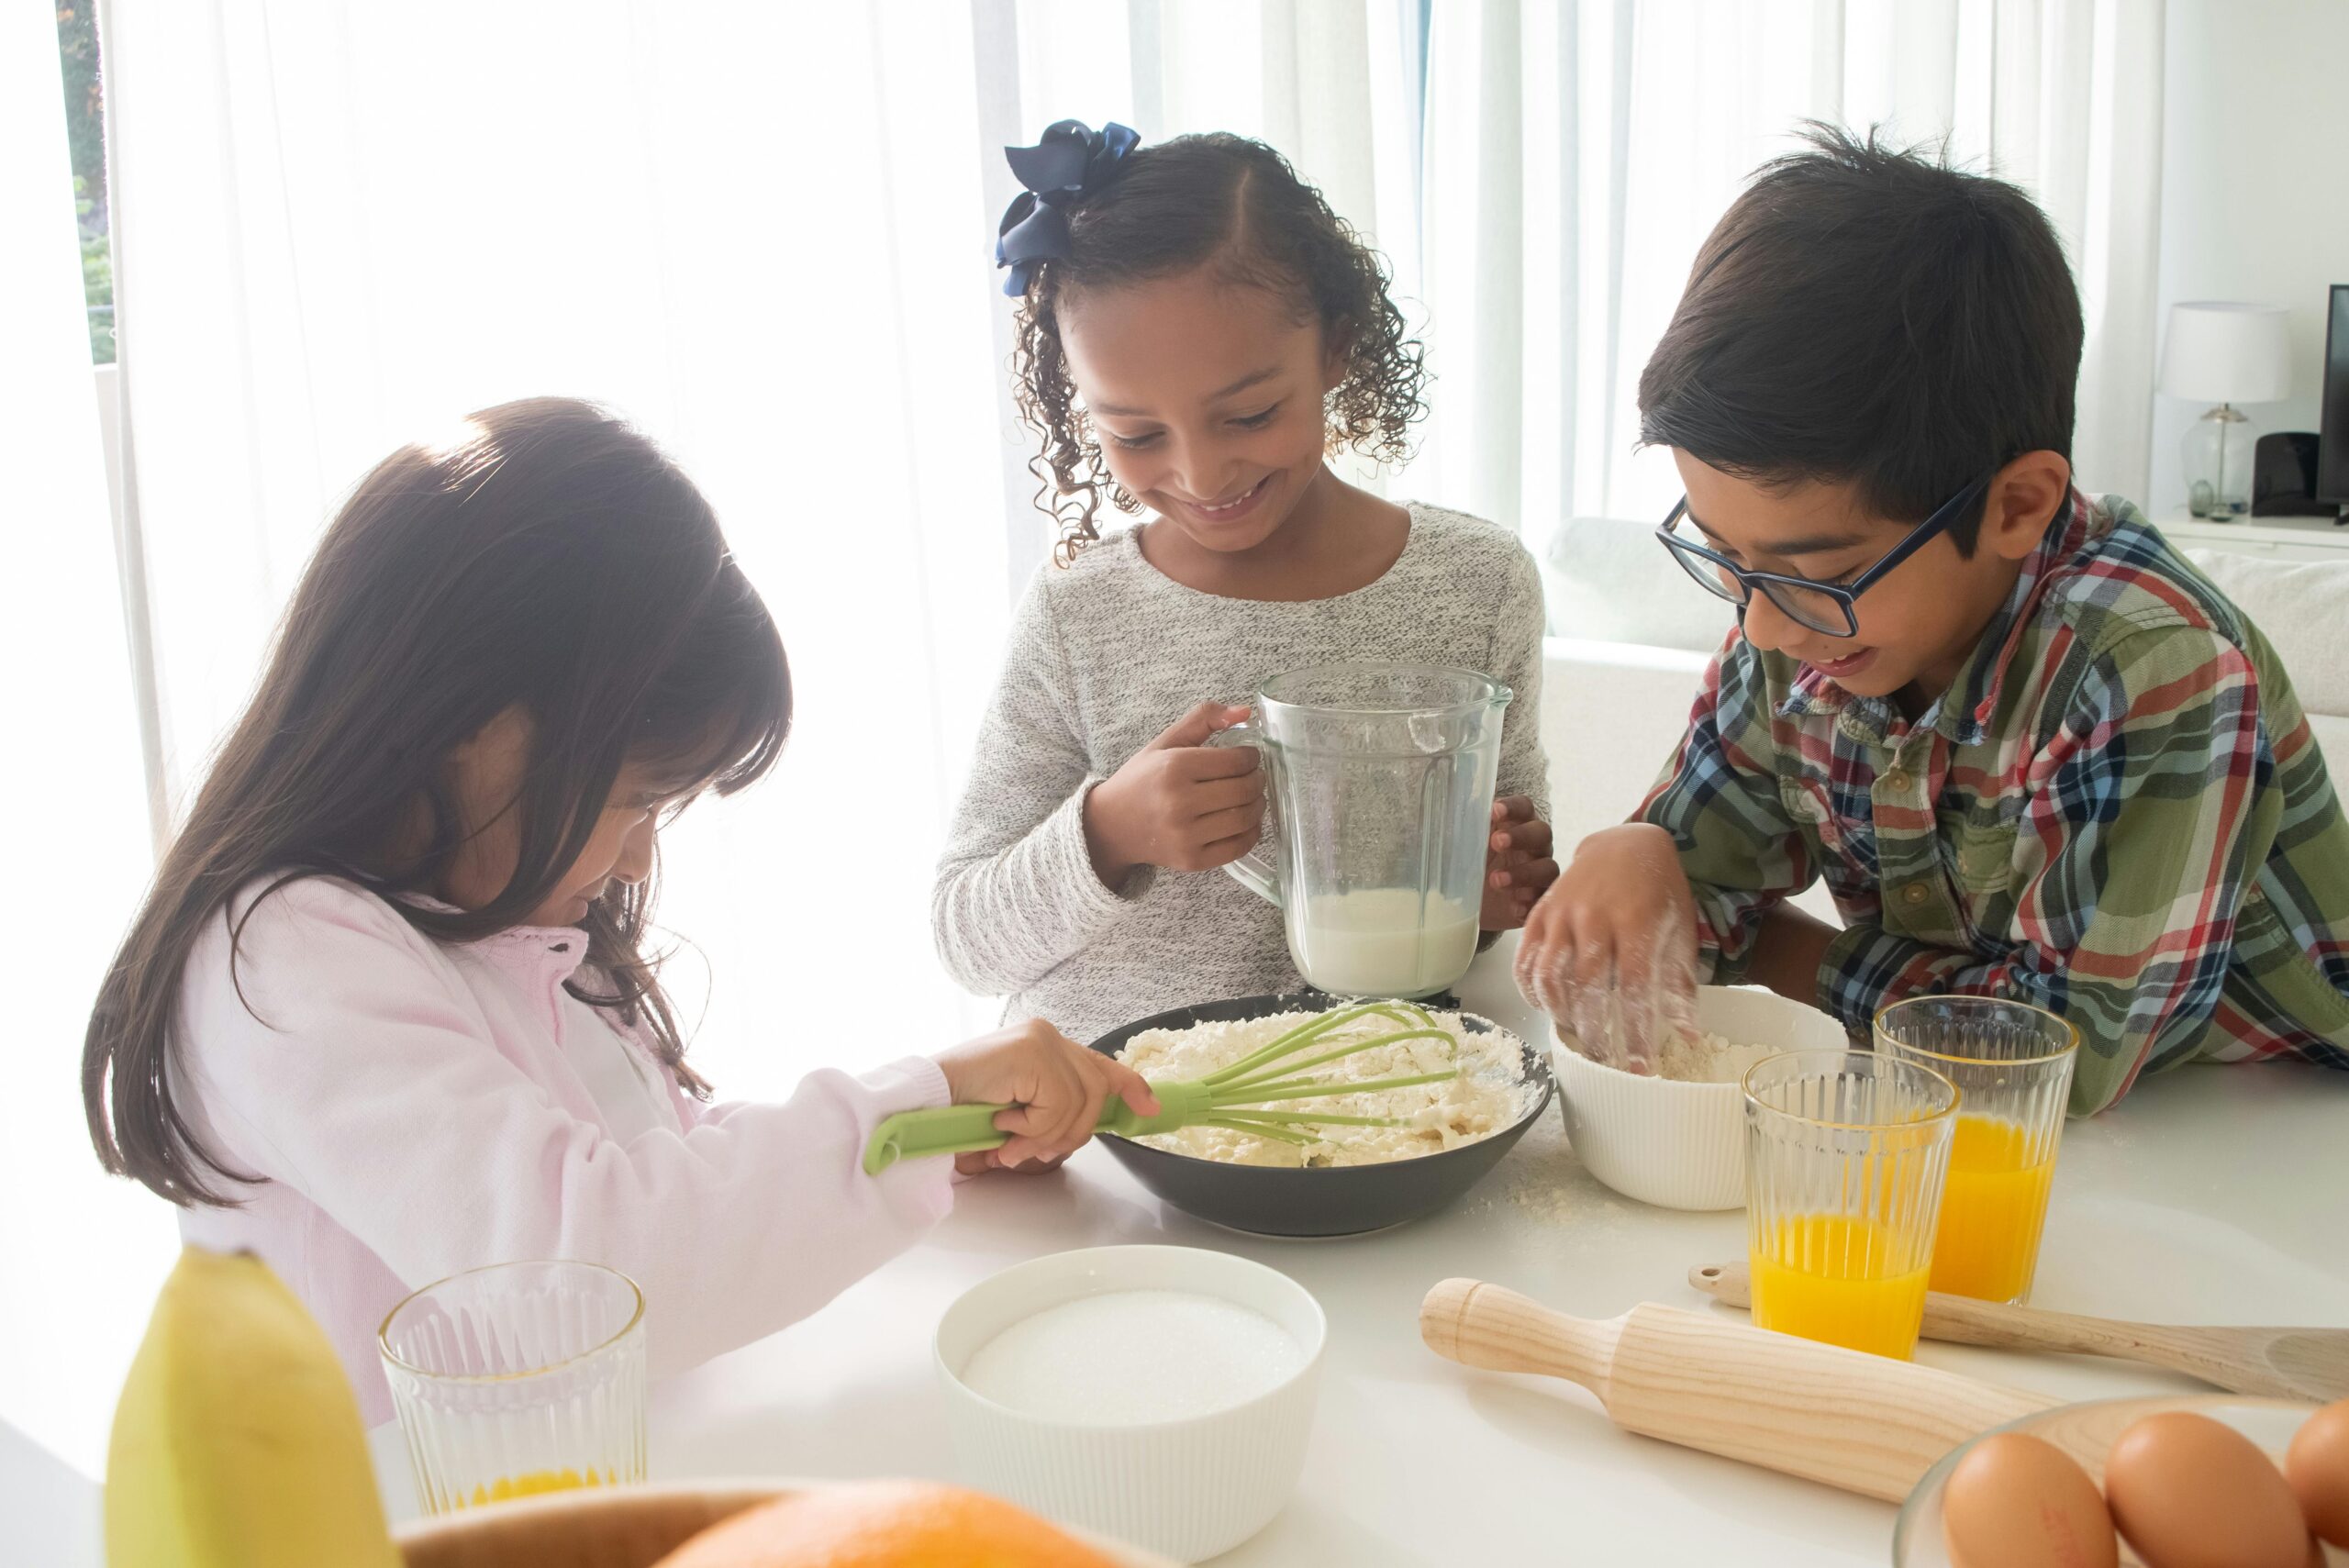 Child combines multisensory learning strategies while reading a recipe during a cooking activity.